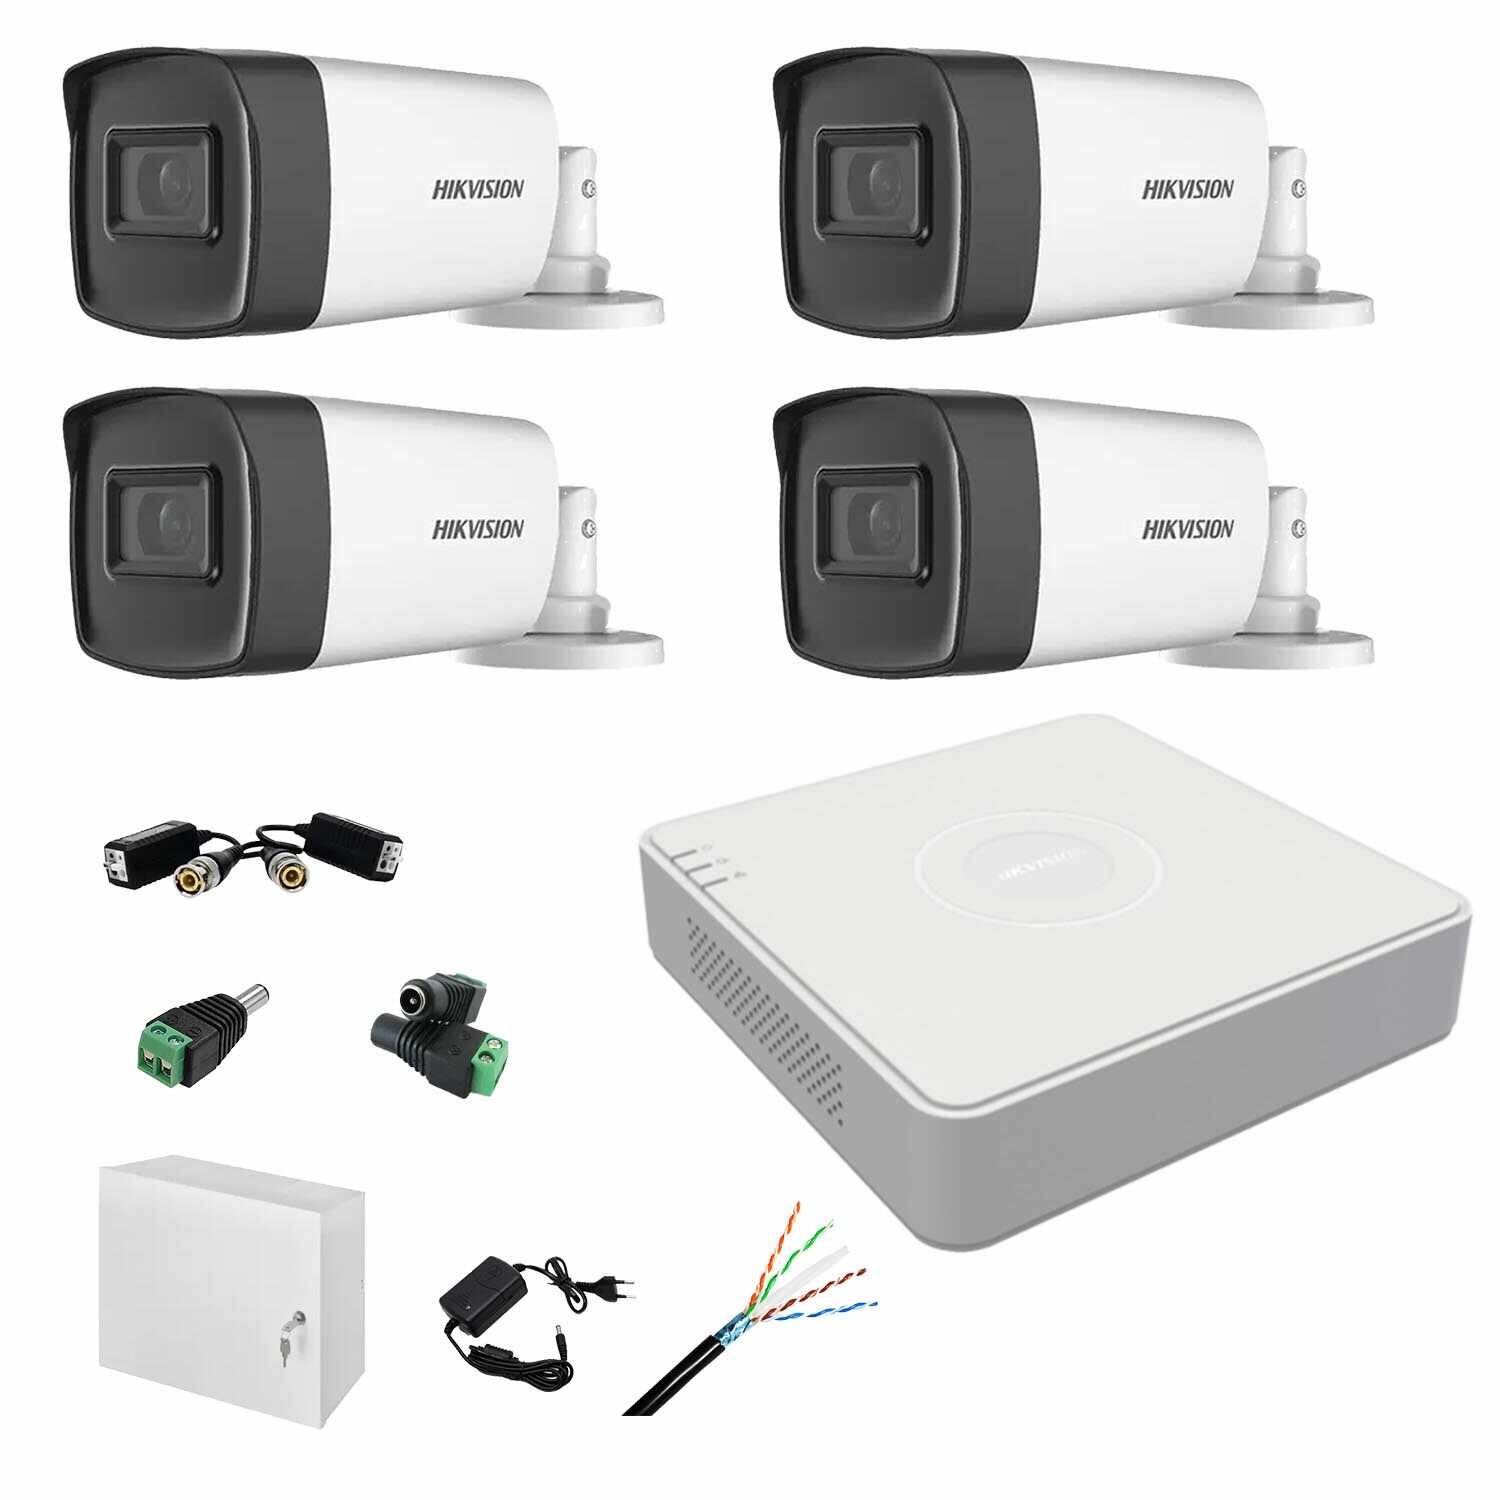 Kit complet profesional 4 camere supraveghere exterior 5MP TurboHD Hikvision IR 40m DVR 4 canale accesorii incluse